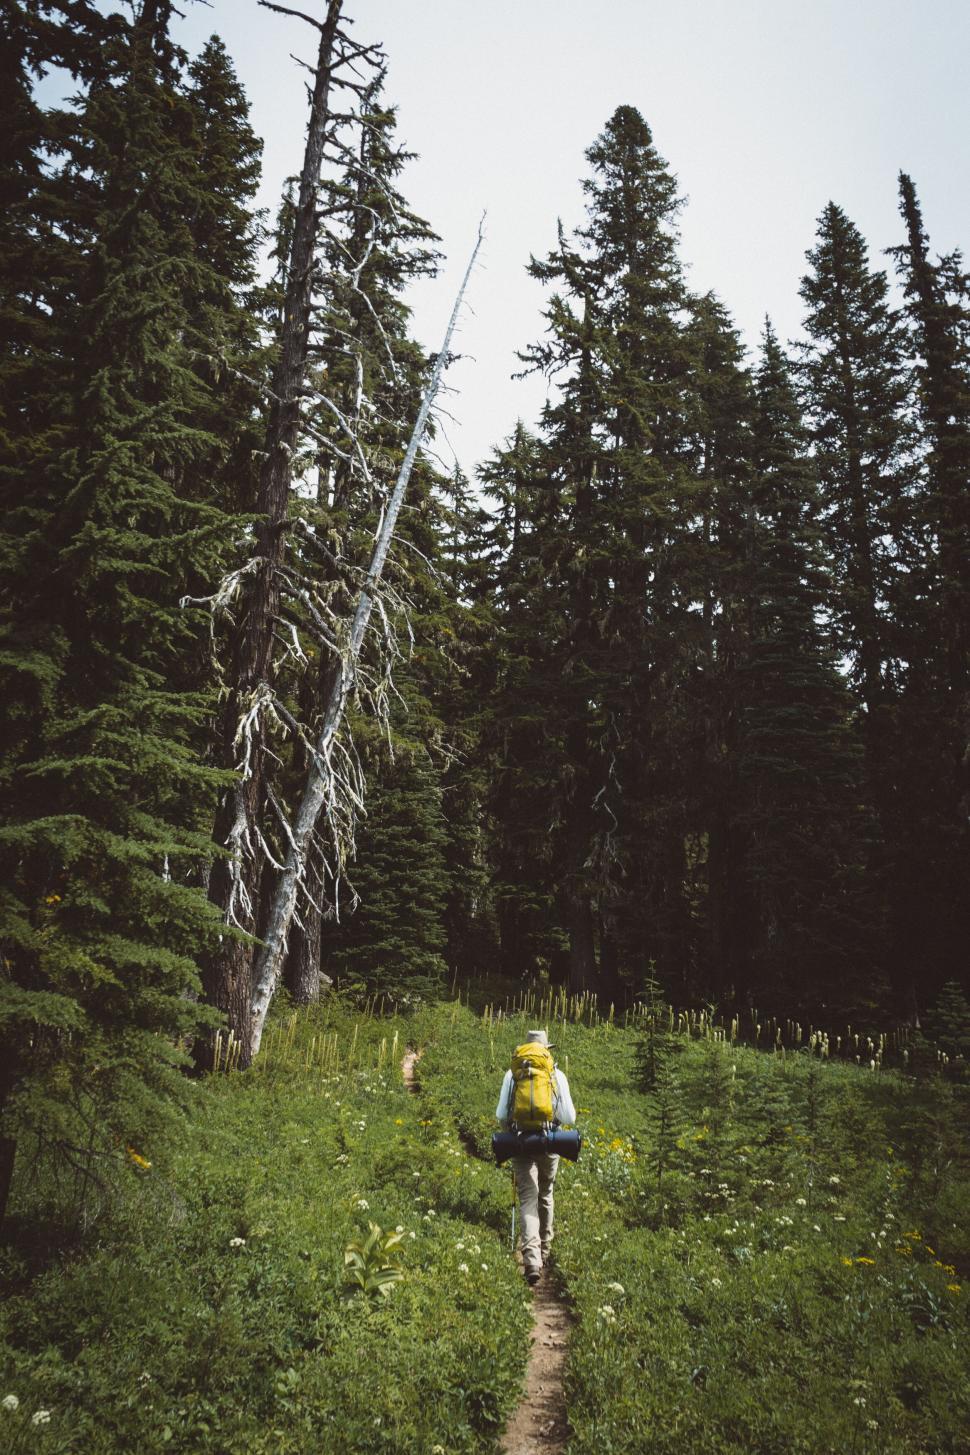 Free Image of Hiker on a forest trail with lush greenery 